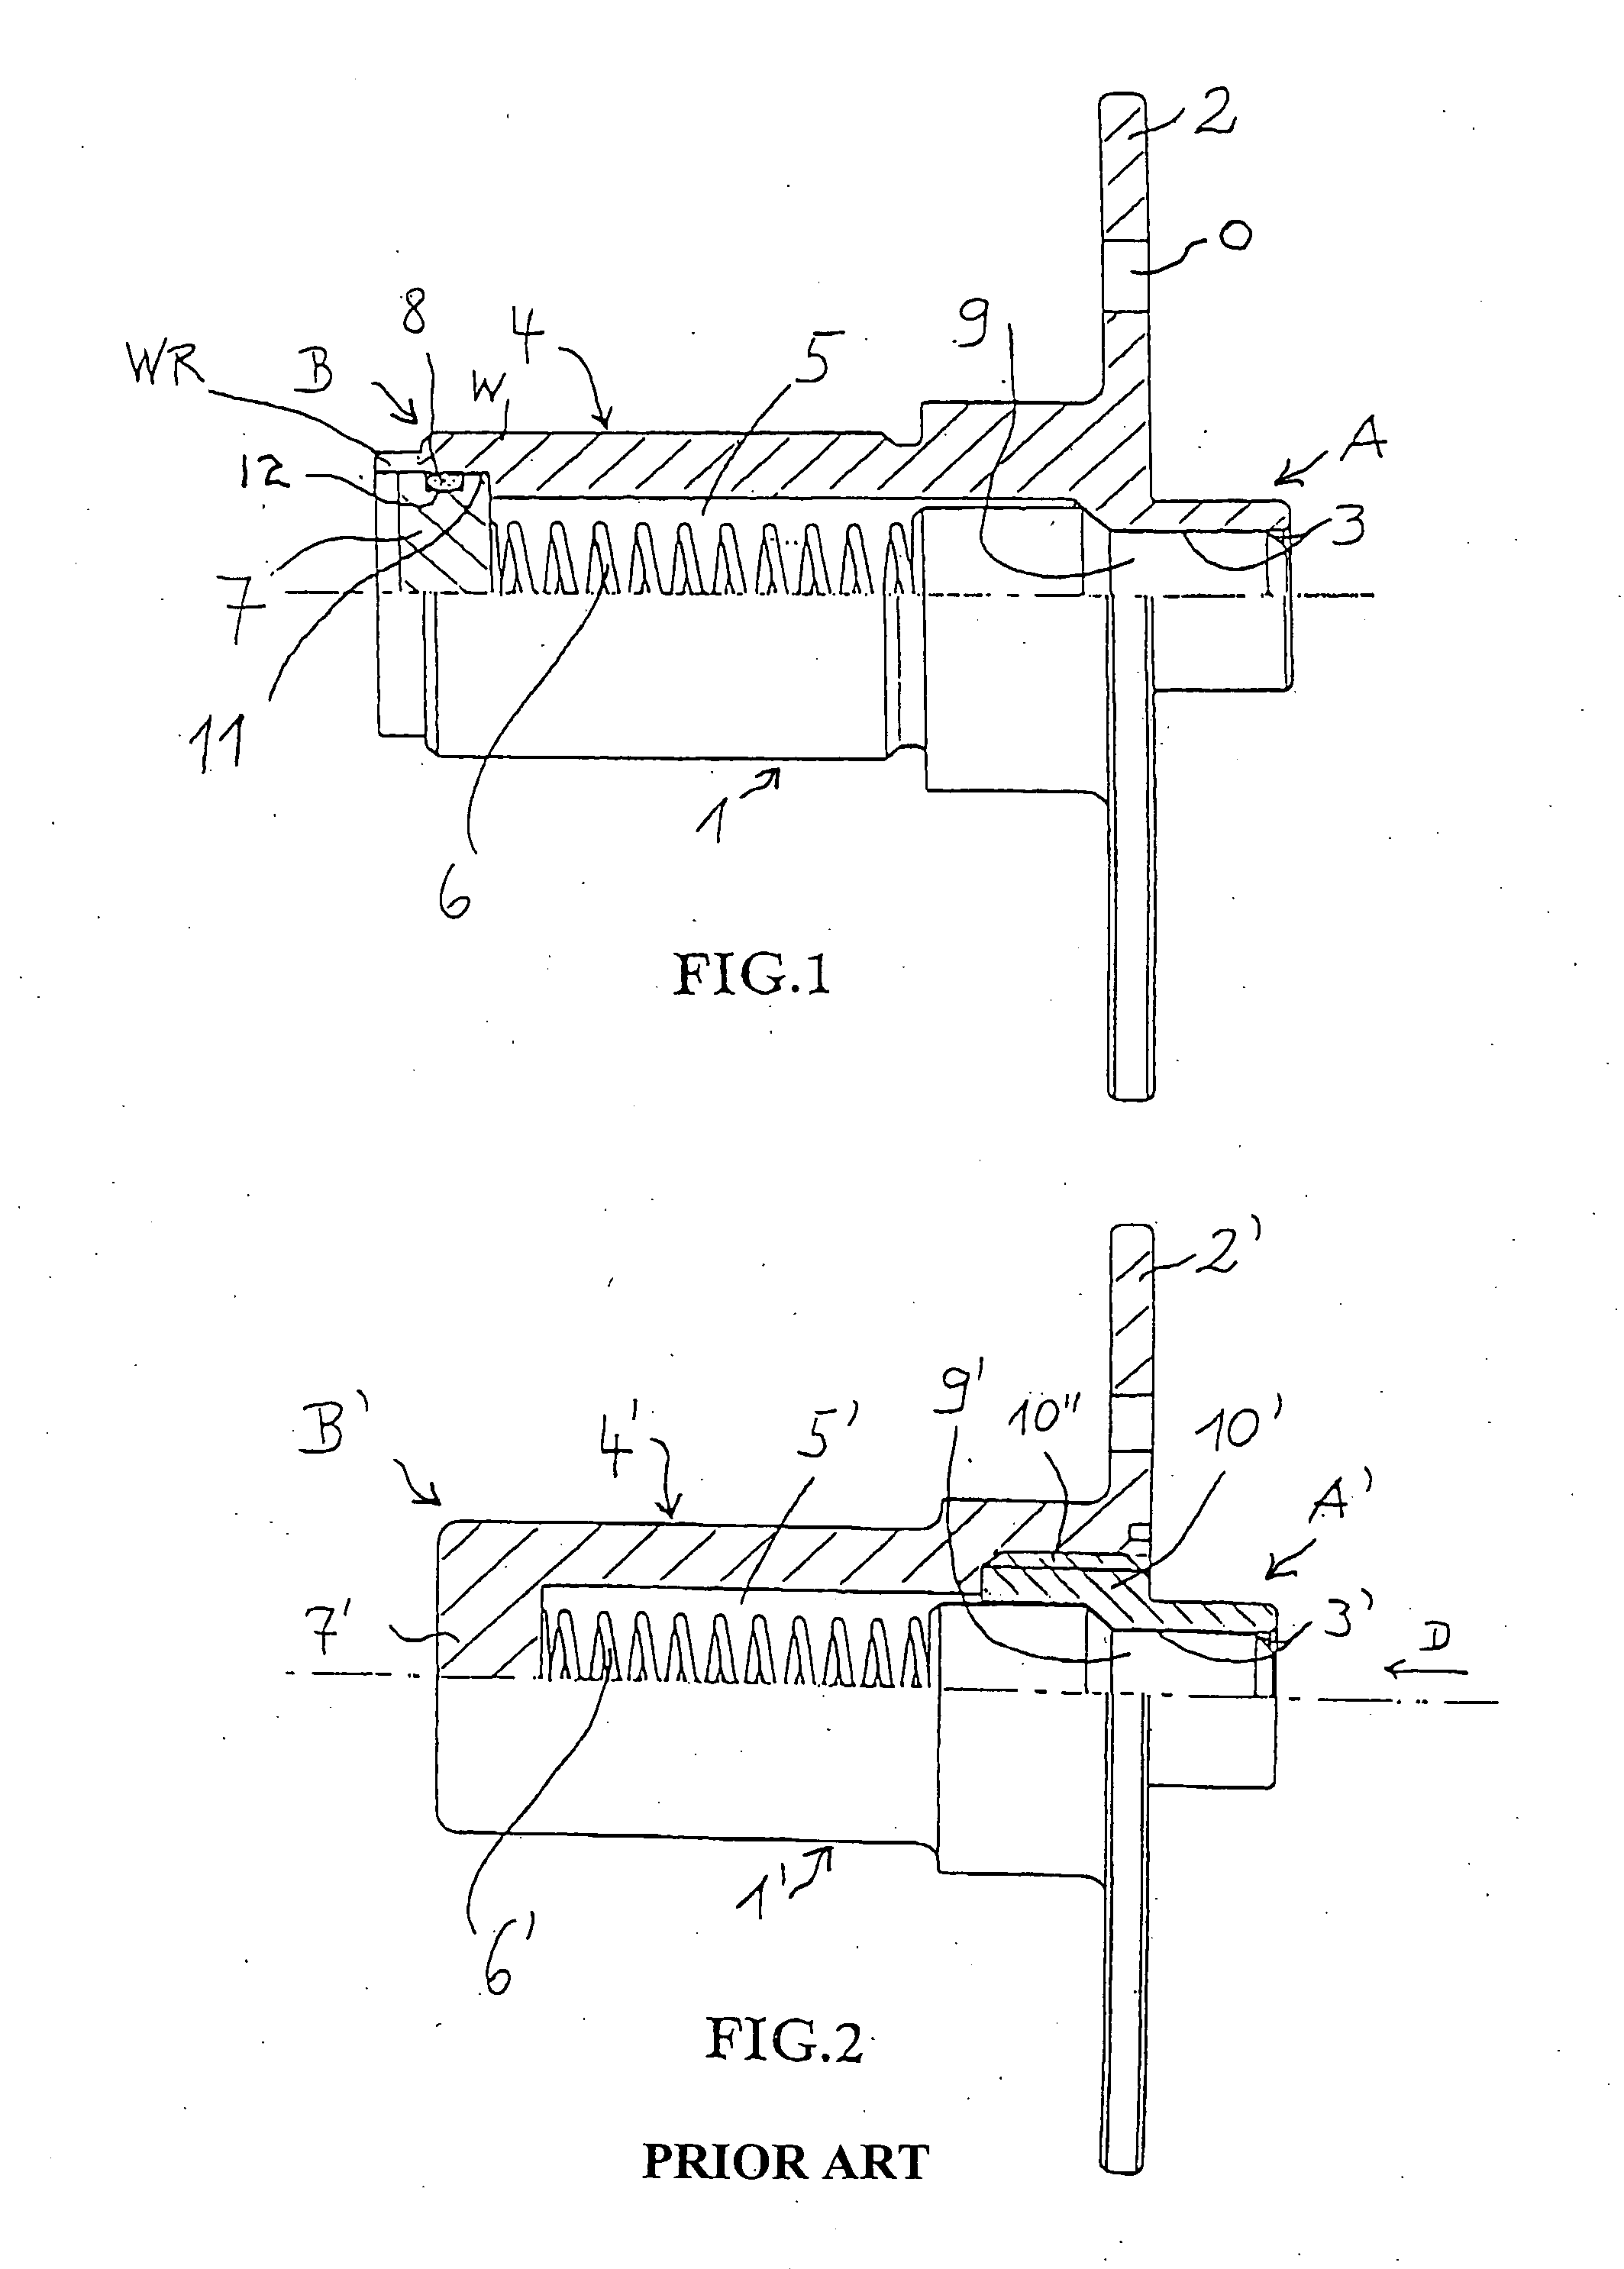 Measuring point bolt and method of making the bolt